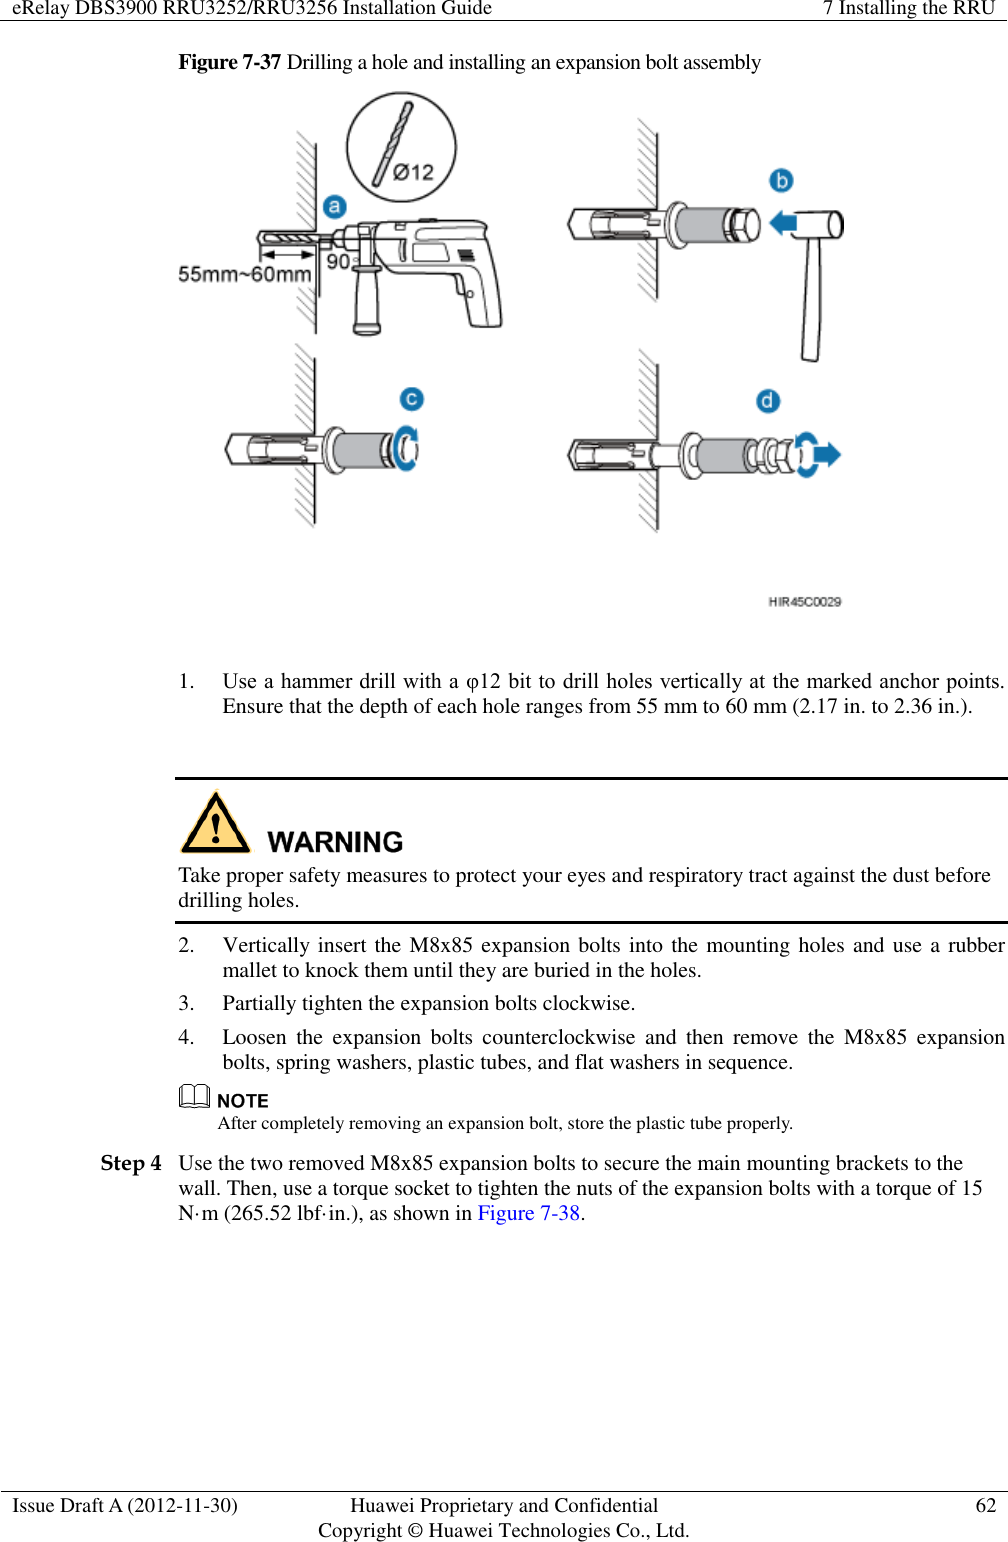 eRelay DBS3900 RRU3252/RRU3256 Installation Guide 7 Installing the RRU  Issue Draft A (2012-11-30) Huawei Proprietary and Confidential                                     Copyright © Huawei Technologies Co., Ltd. 62  Figure 7-37 Drilling a hole and installing an expansion bolt assembly   1. Use a hammer drill with a φ12 bit to drill holes vertically at the marked anchor points. Ensure that the depth of each hole ranges from 55 mm to 60 mm (2.17 in. to 2.36 in.).     Take proper safety measures to protect your eyes and respiratory tract against the dust before drilling holes. 2. Vertically insert the M8x85 expansion bolts into the mounting holes and use a rubber mallet to knock them until they are buried in the holes.   3. Partially tighten the expansion bolts clockwise.   4. Loosen  the  expansion  bolts  counterclockwise  and  then  remove  the  M8x85  expansion bolts, spring washers, plastic tubes, and flat washers in sequence.    After completely removing an expansion bolt, store the plastic tube properly. Step 4 Use the two removed M8x85 expansion bolts to secure the main mounting brackets to the wall. Then, use a torque socket to tighten the nuts of the expansion bolts with a torque of 15 N·m (265.52 lbf·in.), as shown in Figure 7-38.   